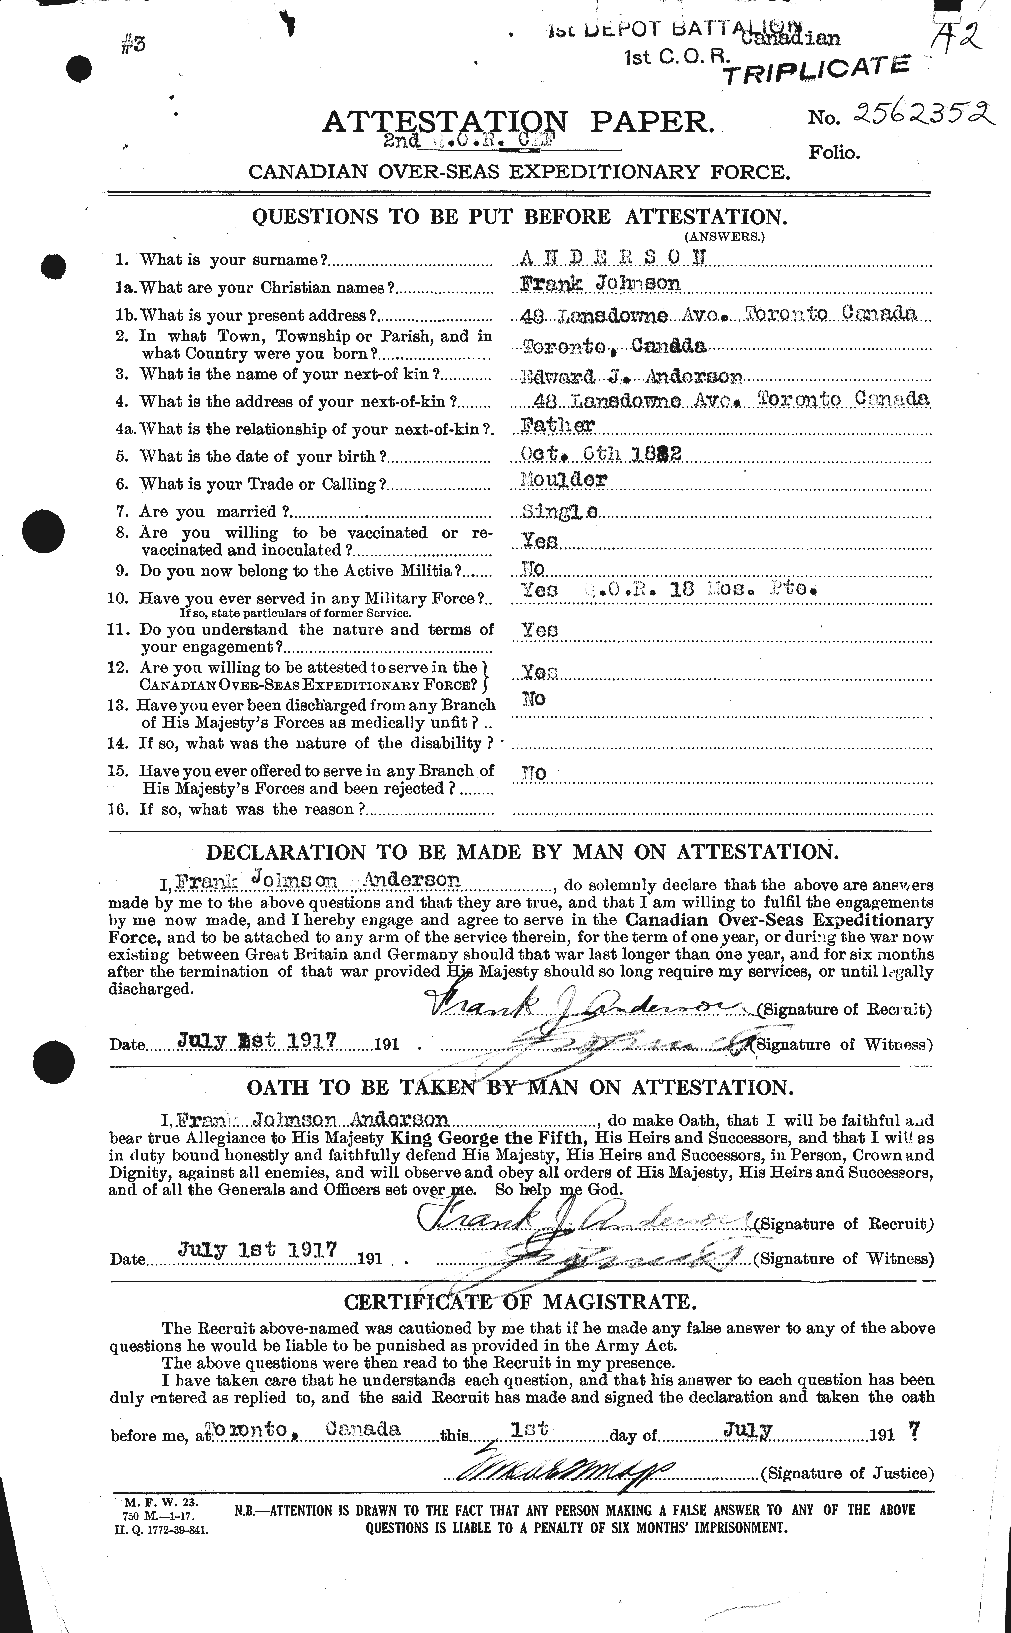 Personnel Records of the First World War - CEF 209845a